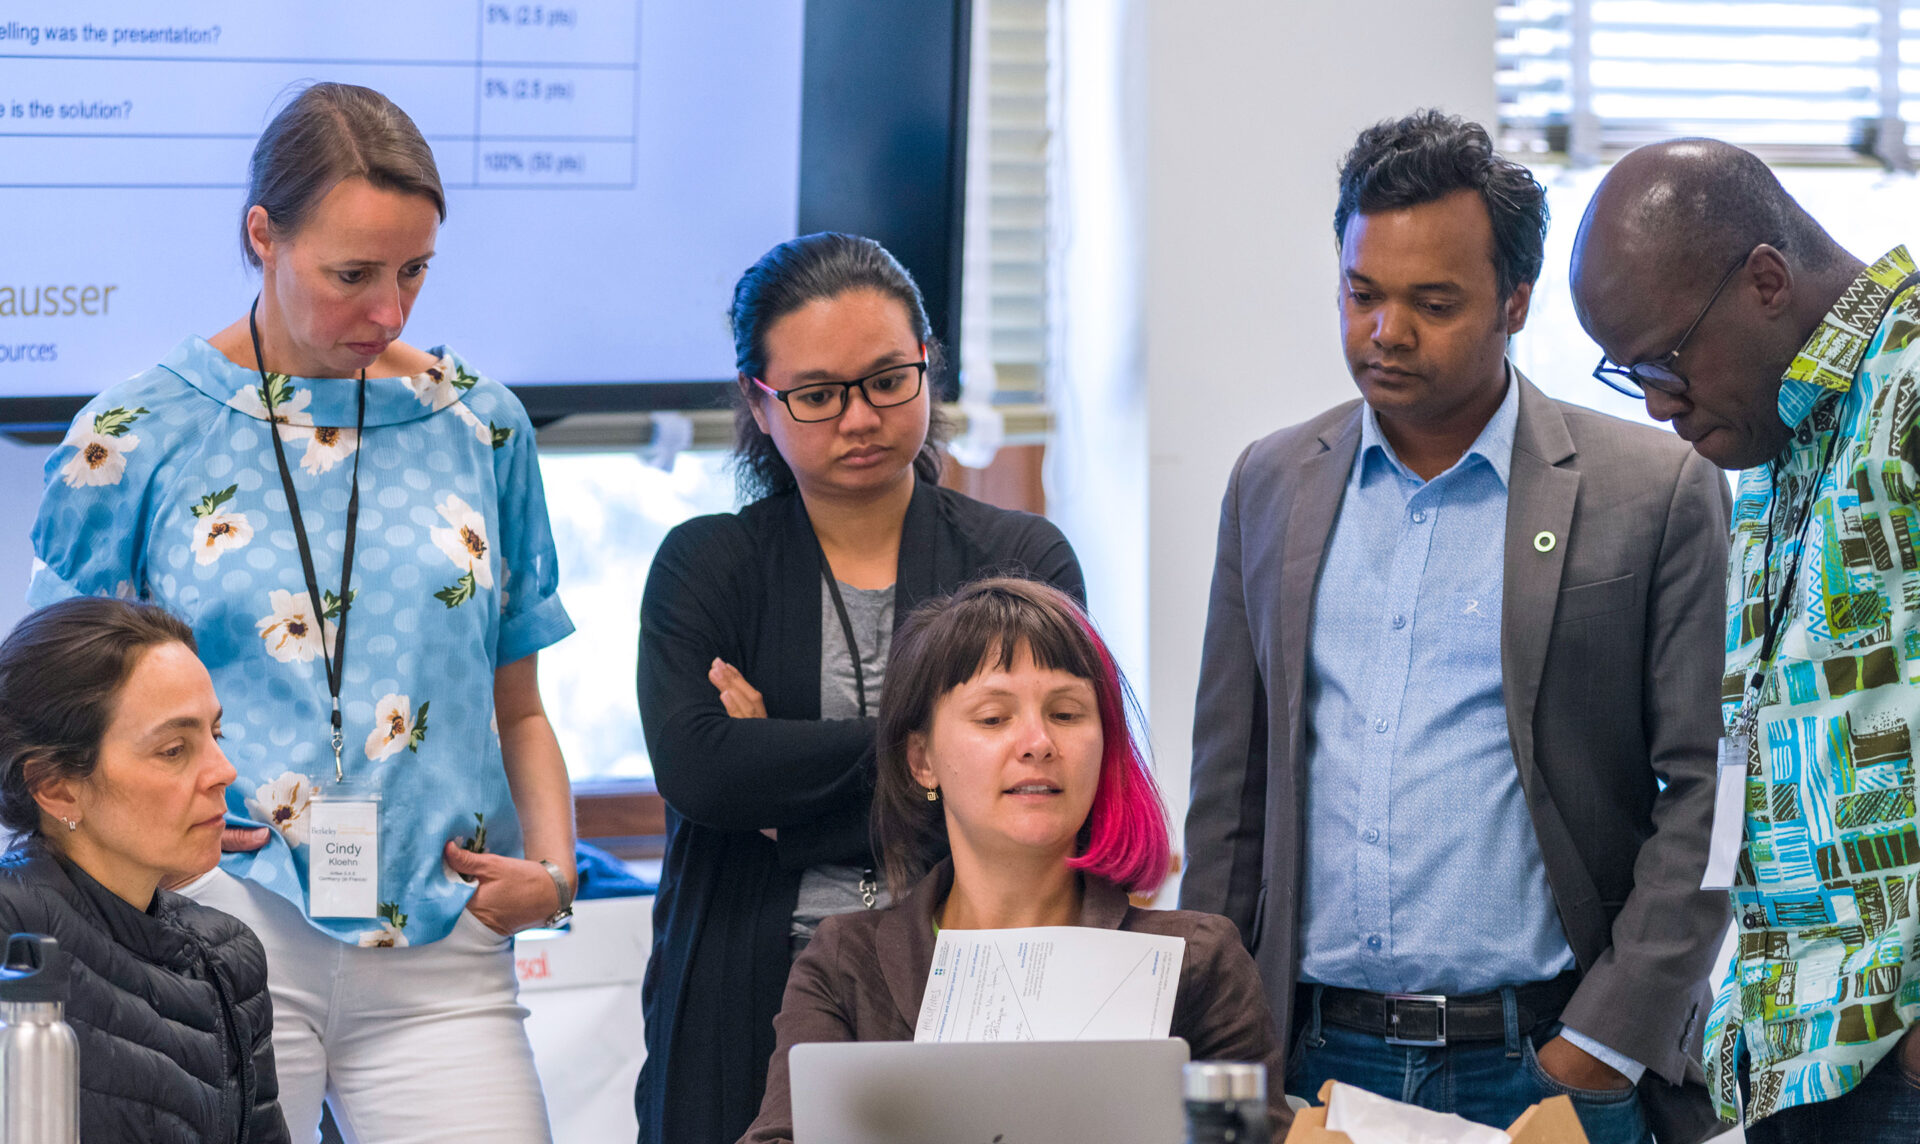 Six Beahrs ELP fellows working on a project in a Berkeley classroom, with one woman pointing to a laptop screen and the others listening to her, as an example of a classroom environment similar to the Master of Climate Solutions